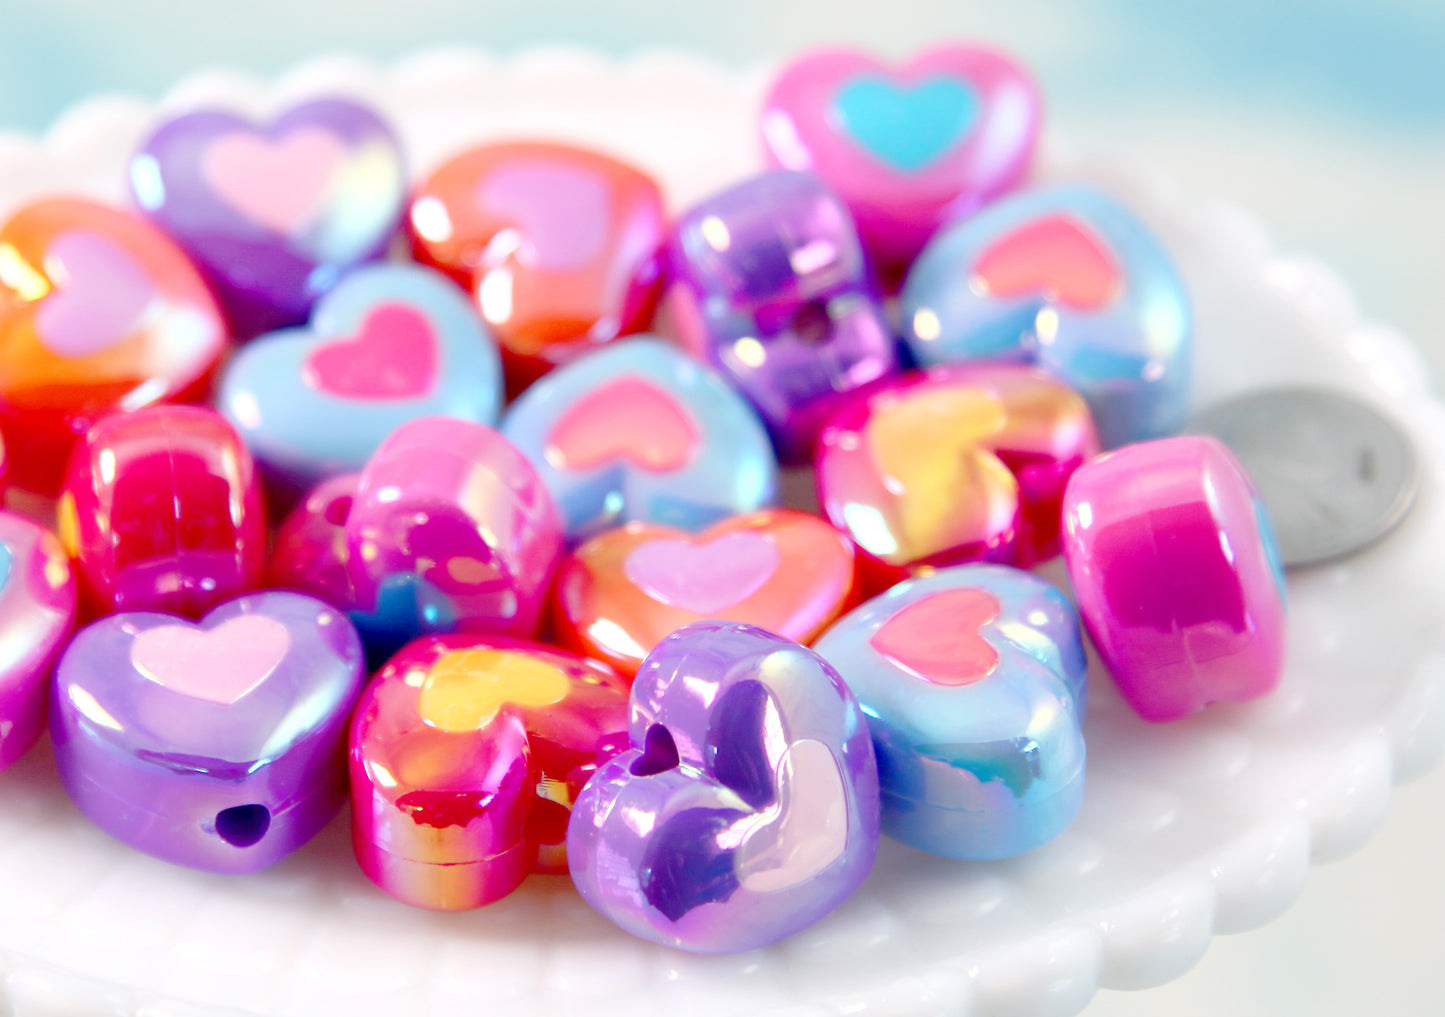 Heart Beads - 22mm Amazing AB Bright Color Opaque Double Heart Acrylic or Resin Beads - 10 pcs set